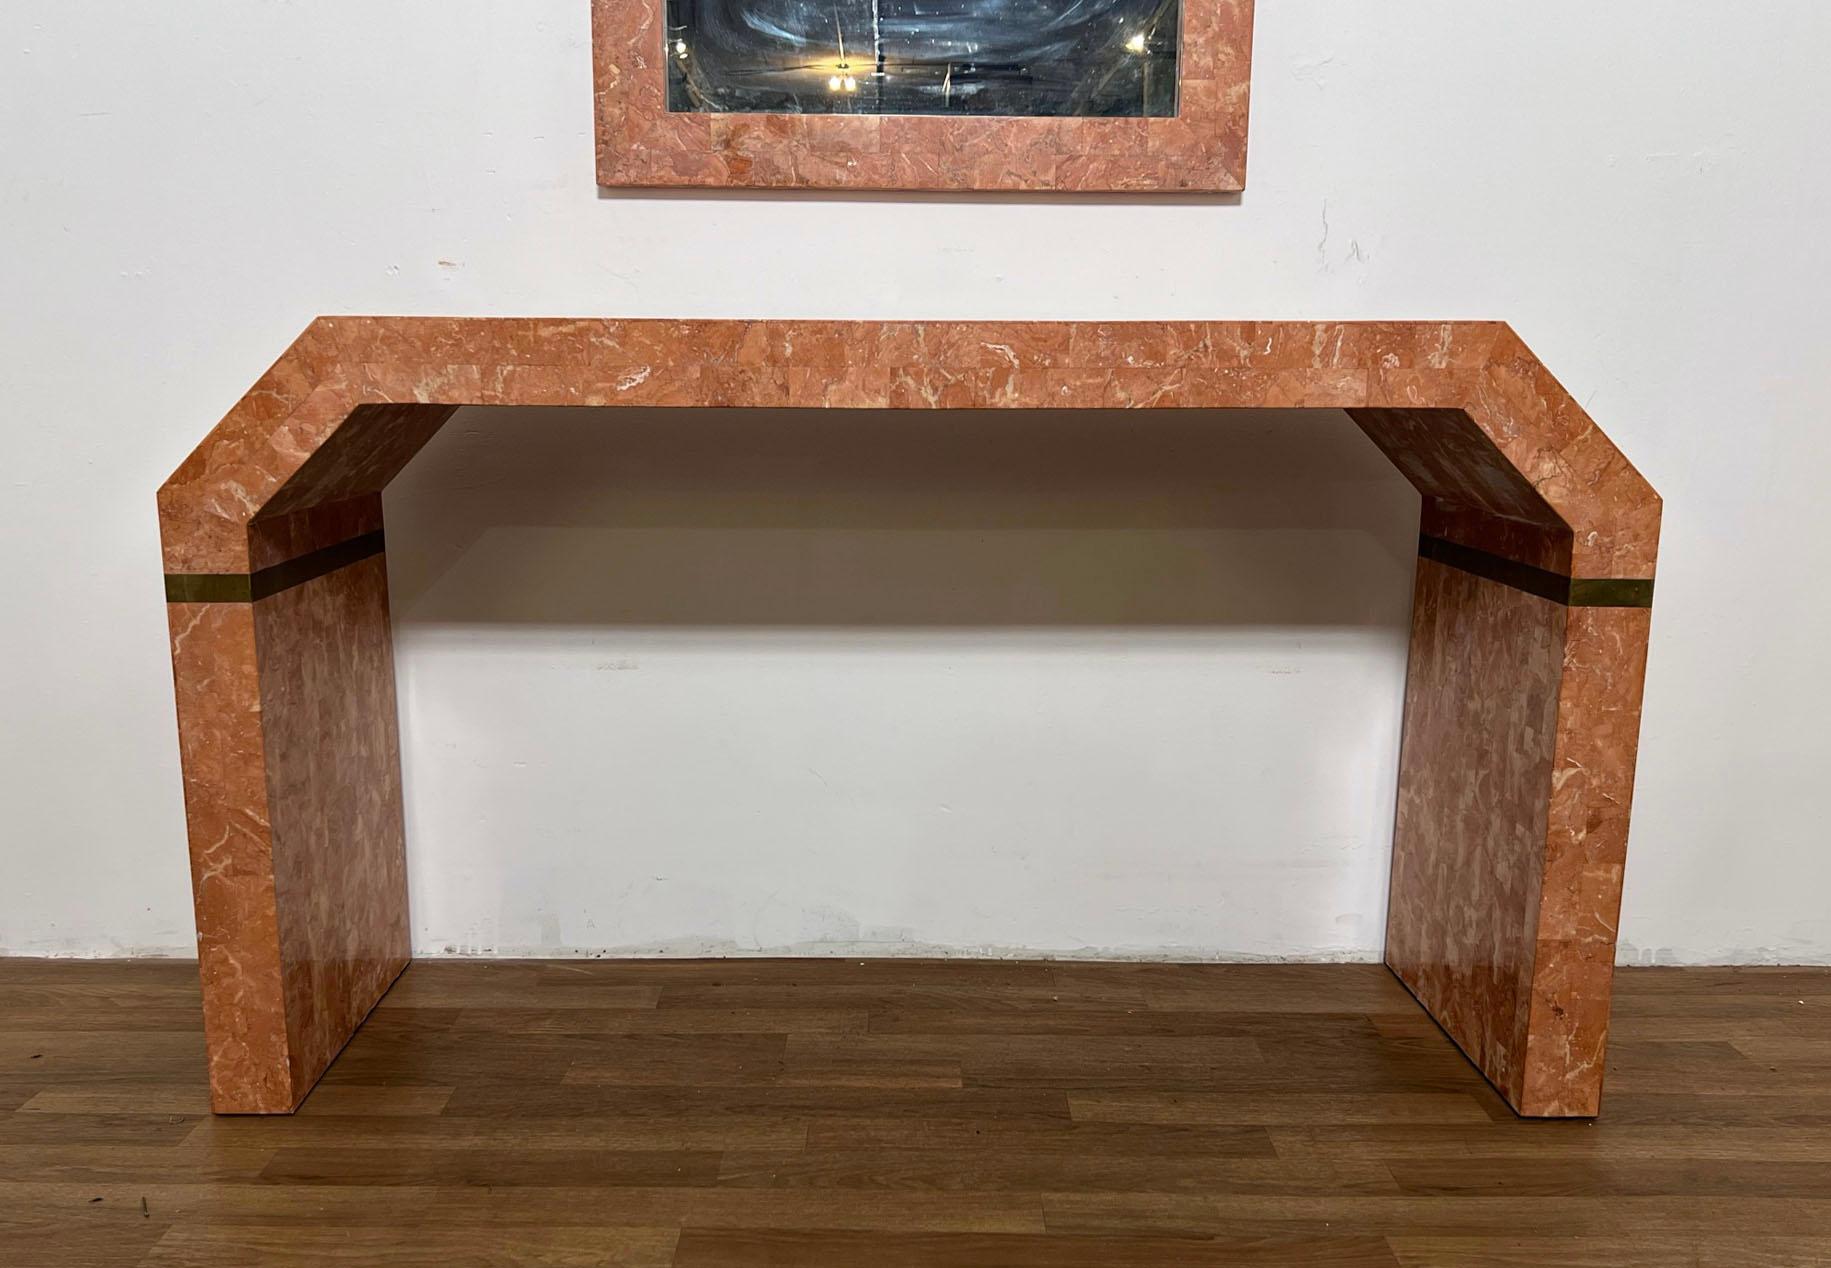 A postmodern mirror and console in coral toned tessellated fossil stone with brass trim, unmarked, but most likely by Maitland Smith.

The console measures 52